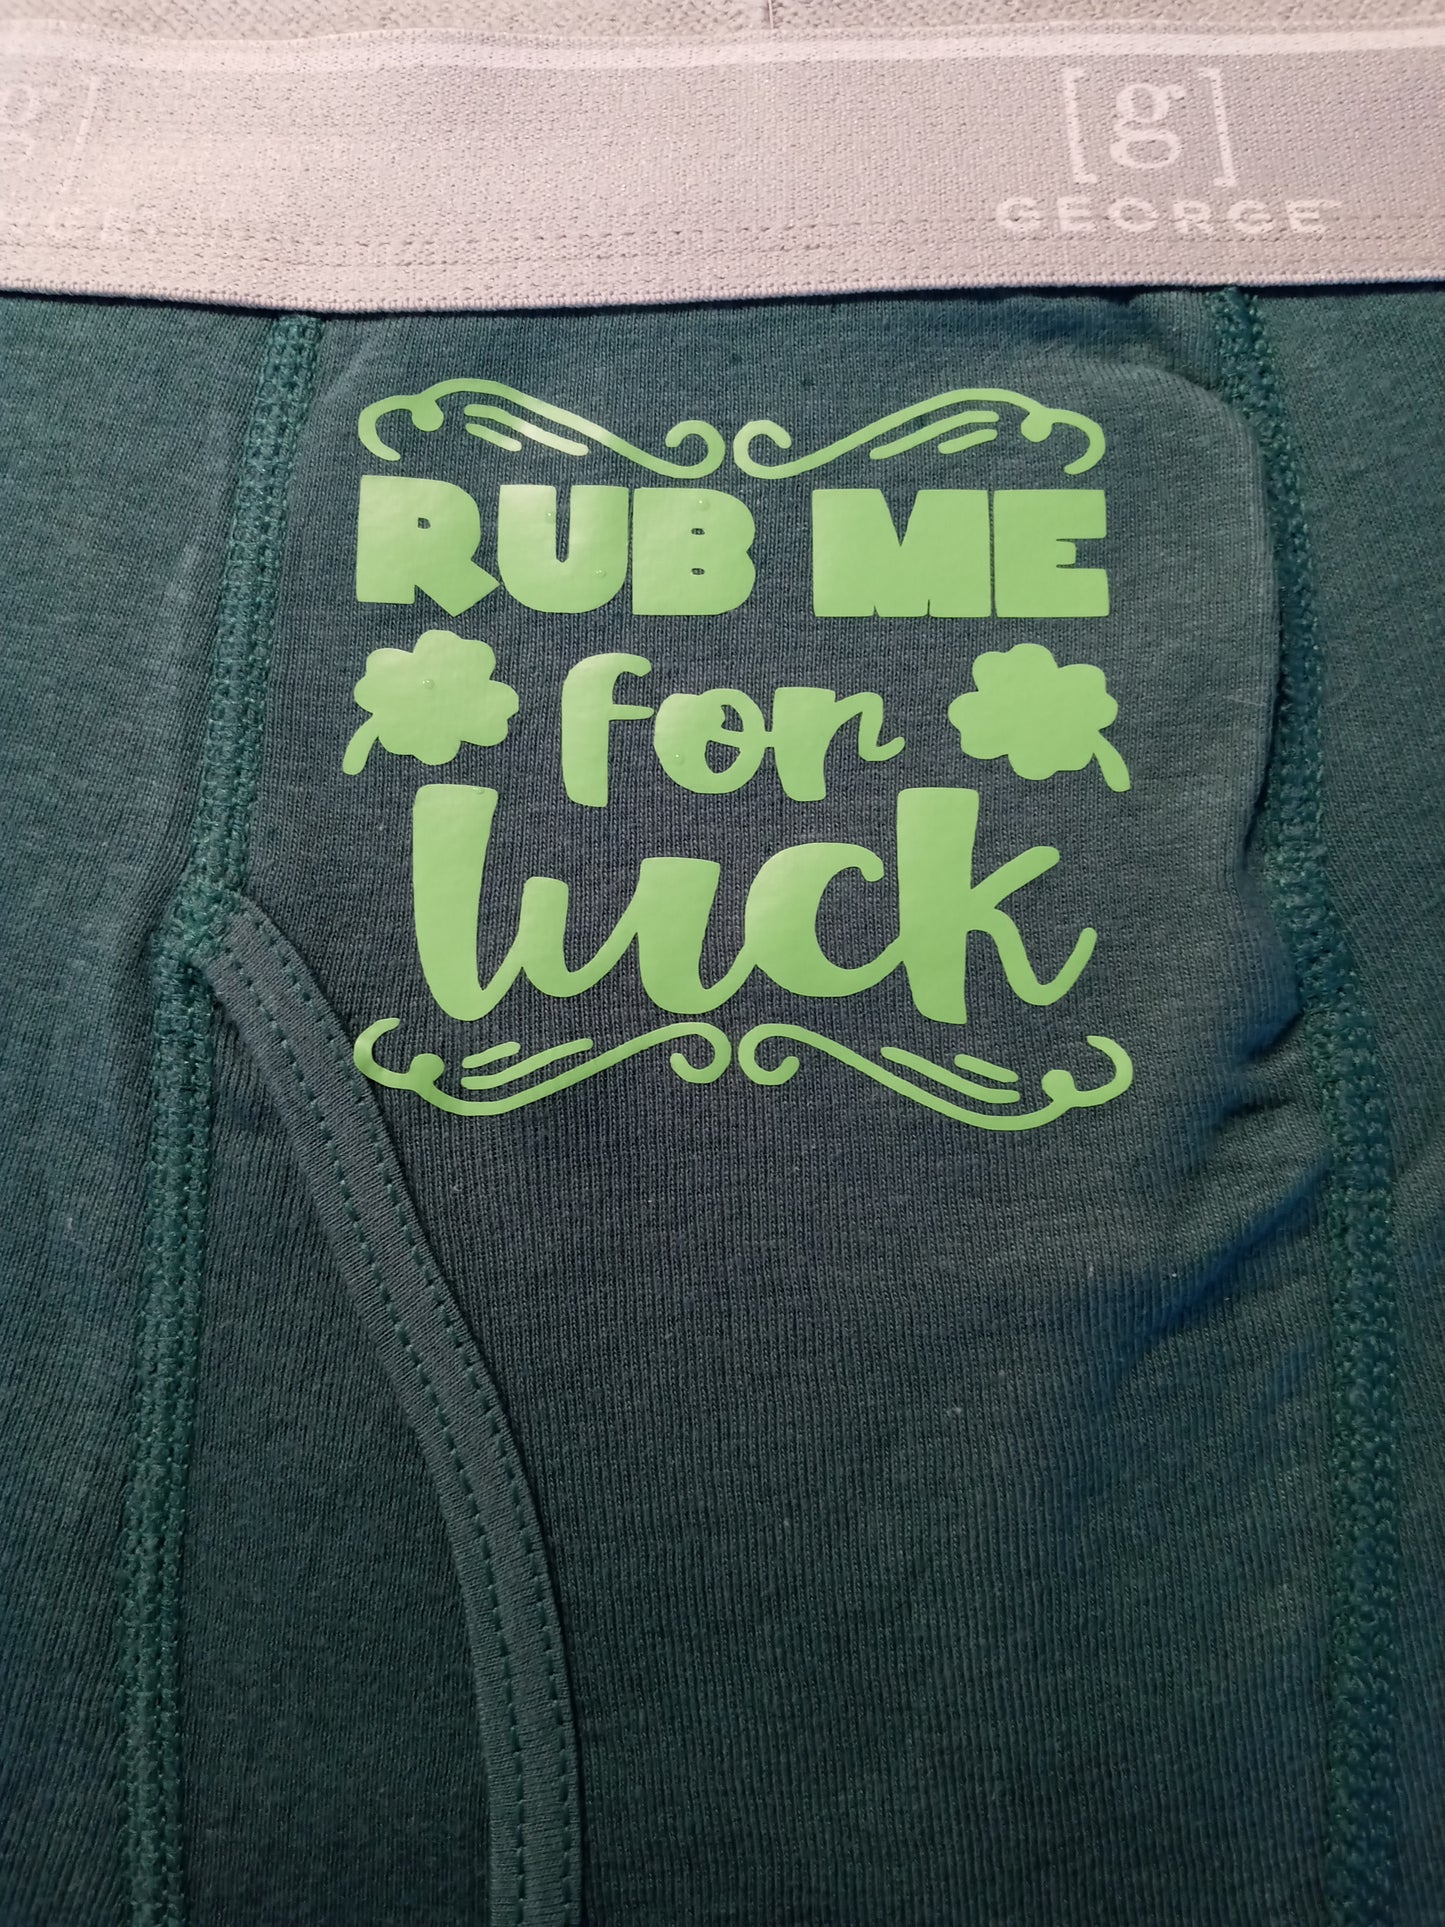 Rub me for luck boxer shorts